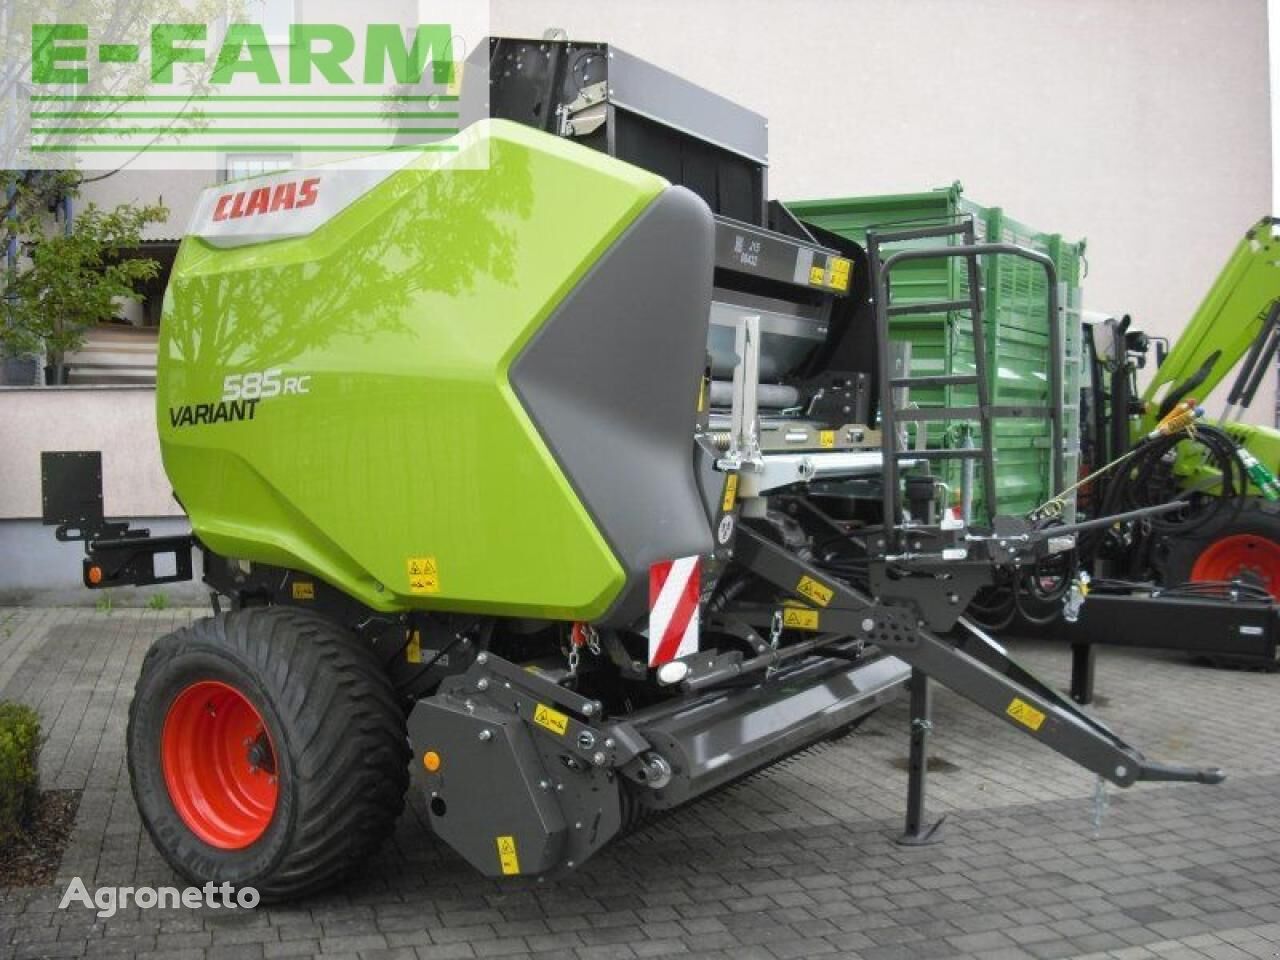 Claas variant 585 rc pro square baler